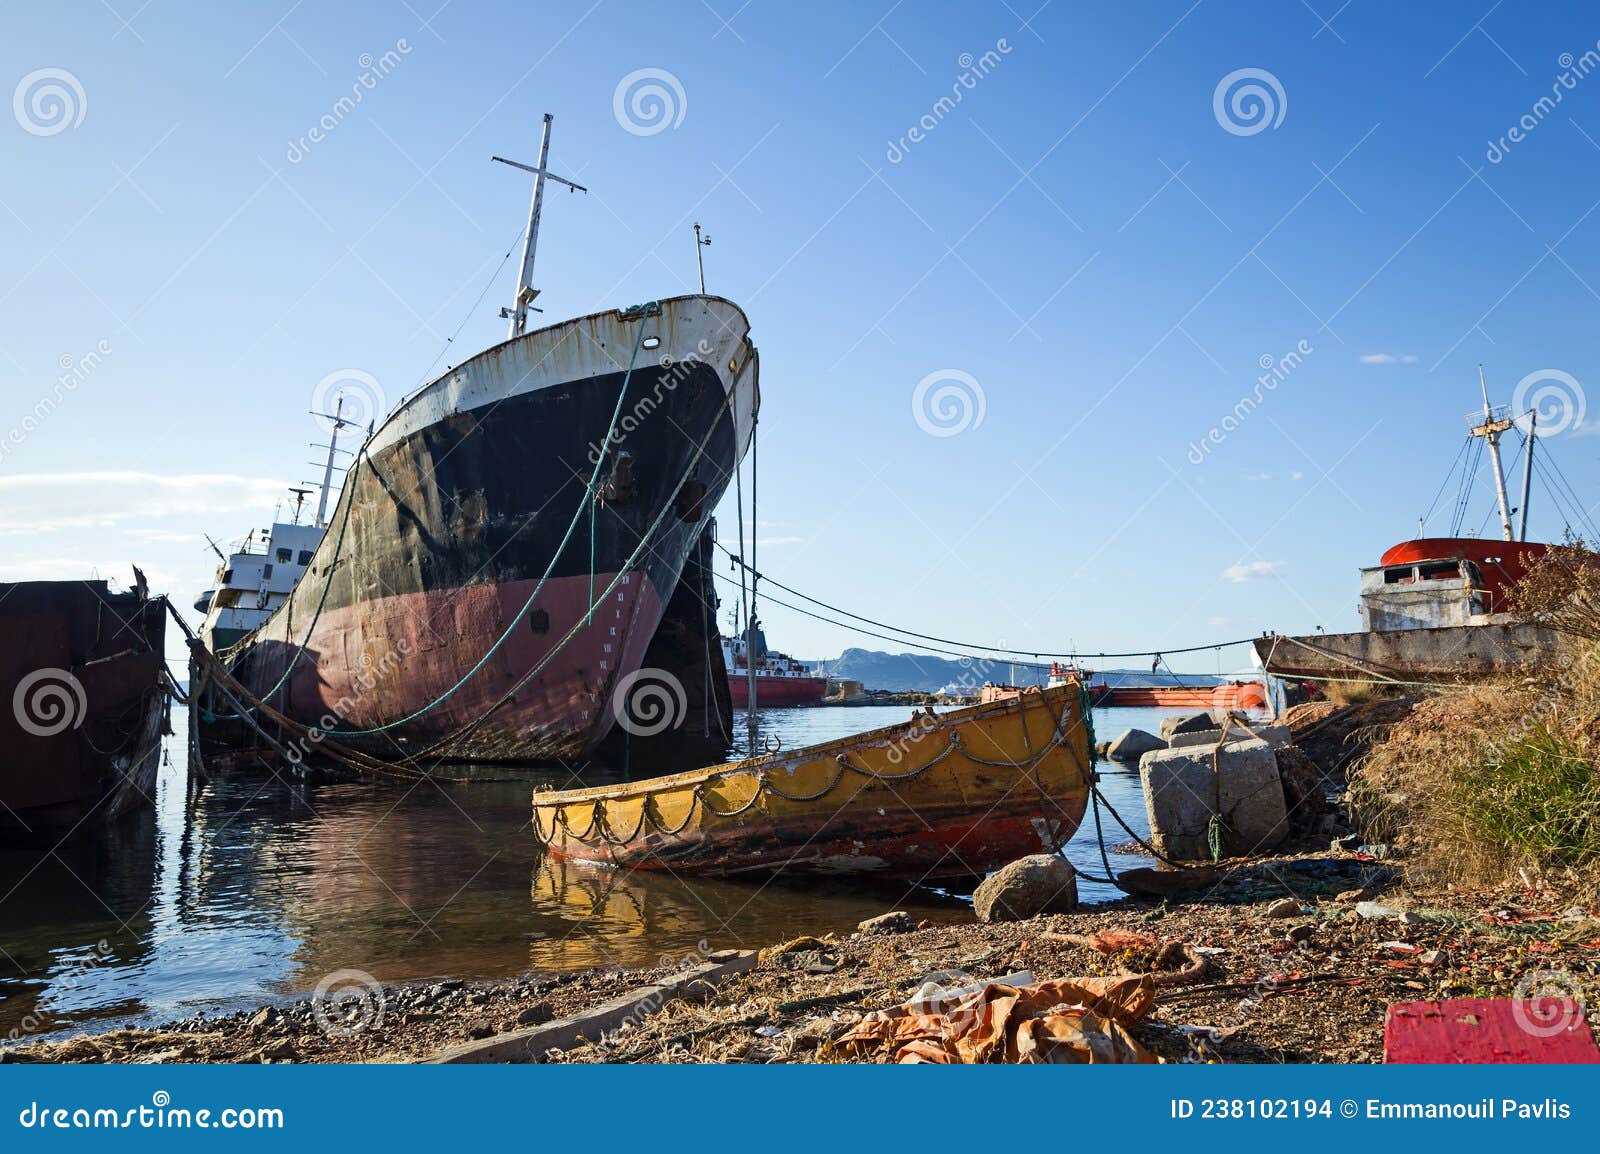 decommissioned ships in a dismantling yard